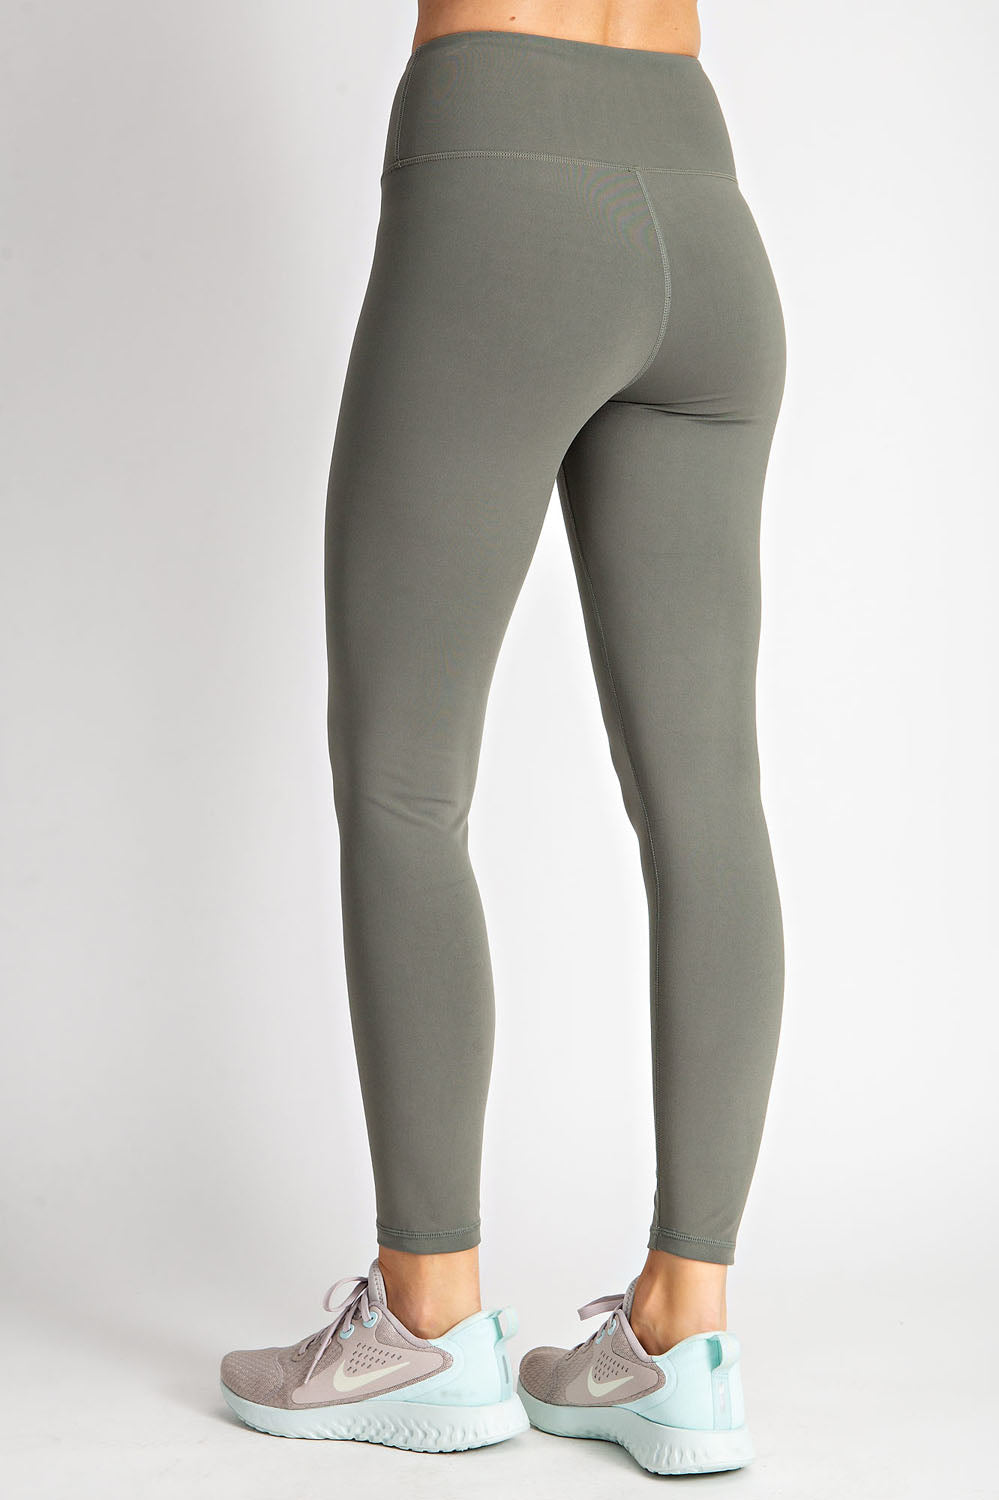 Super soft and yummy leggings now in stock with adorable envelope